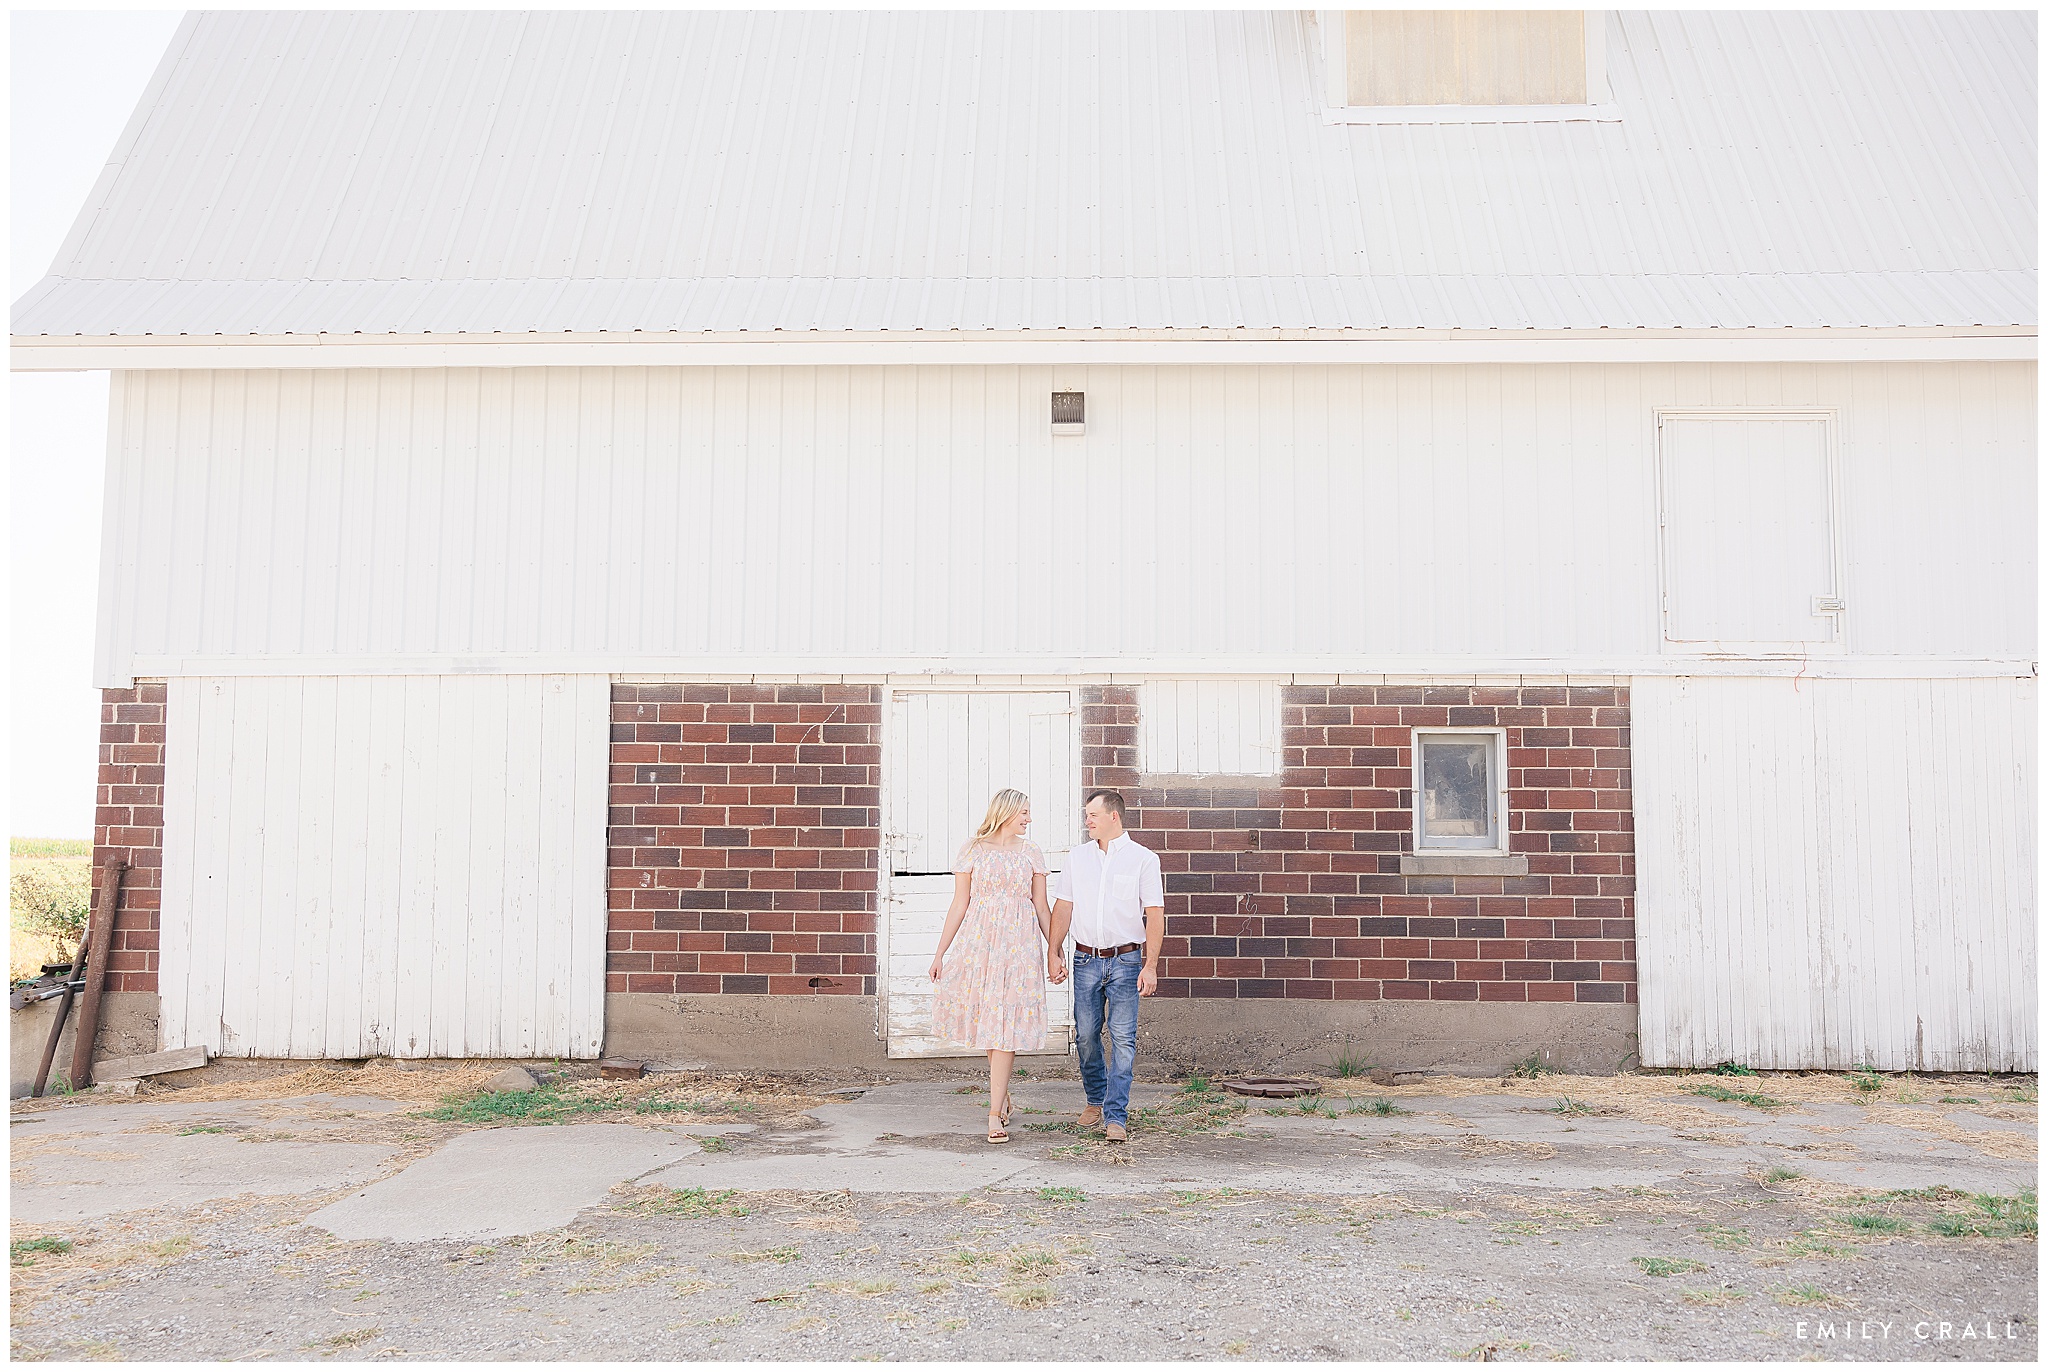 countryside_engagement_md_emilycrall_photo_1405.jpg